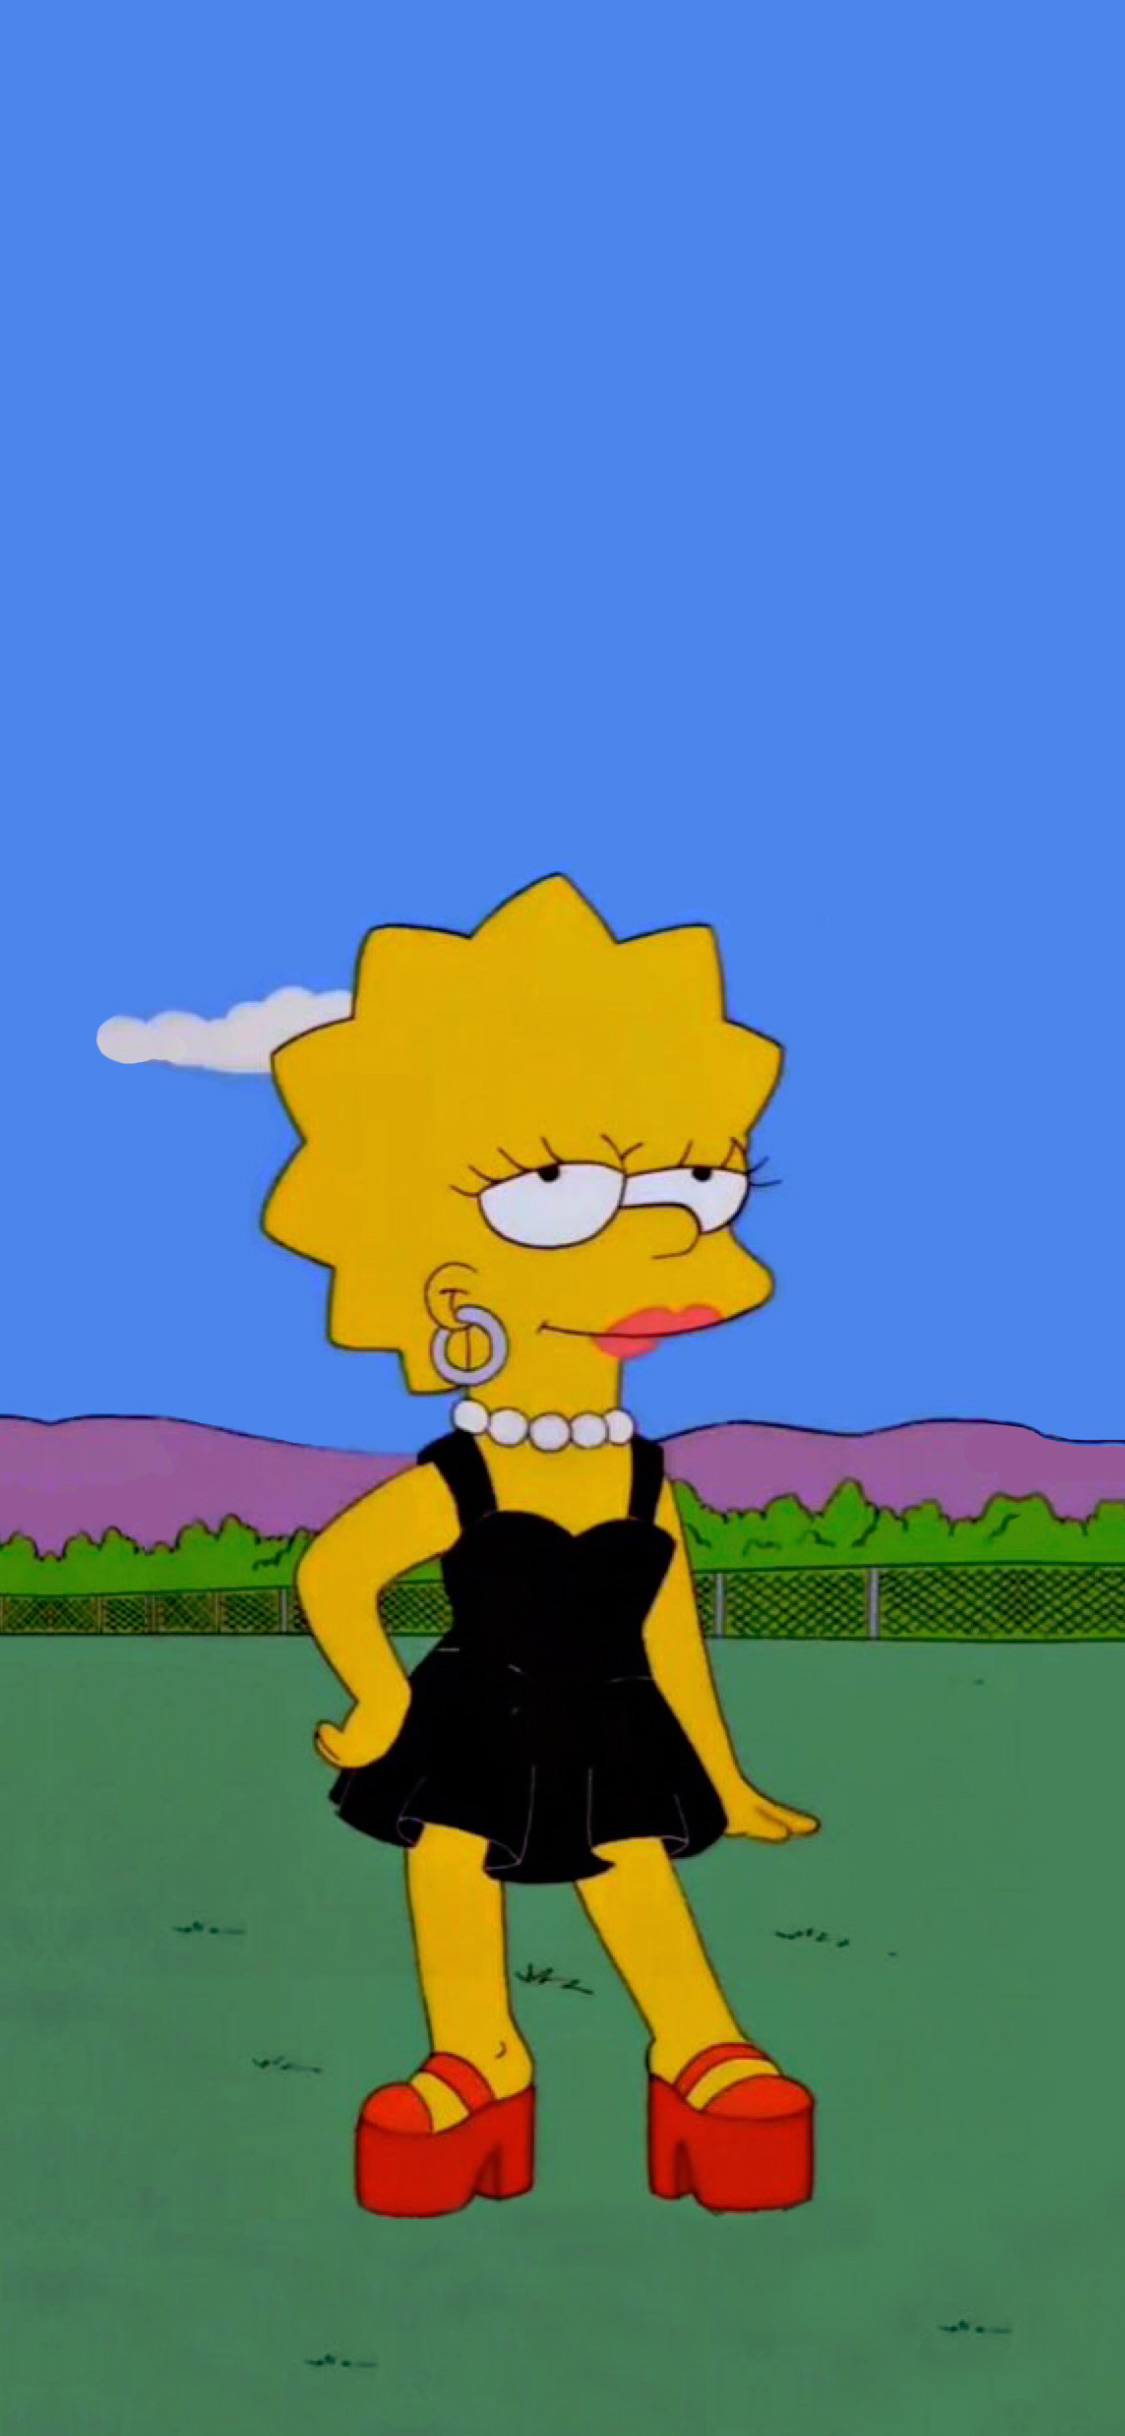 Lisa From The Simpsons Wallpapers